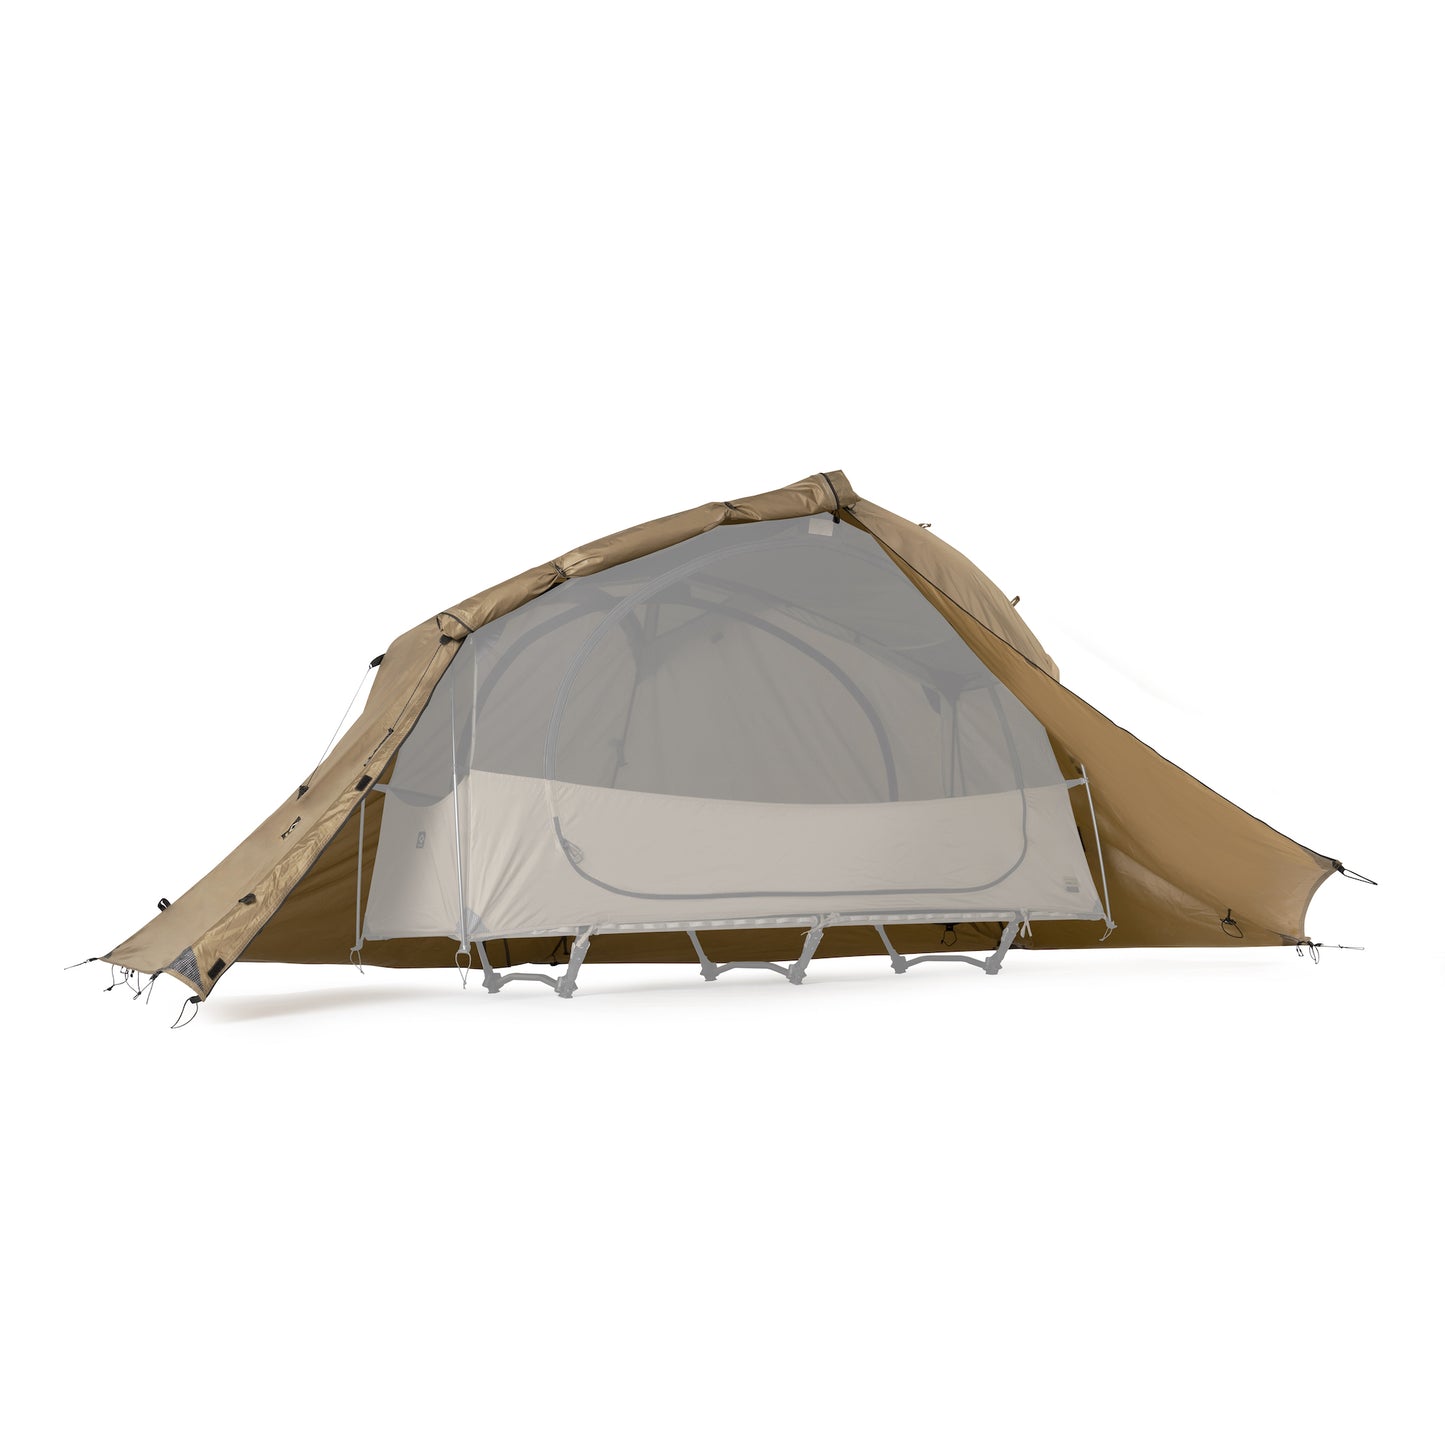 Tac. Cot Tent Solo Fly - Coyote Tan